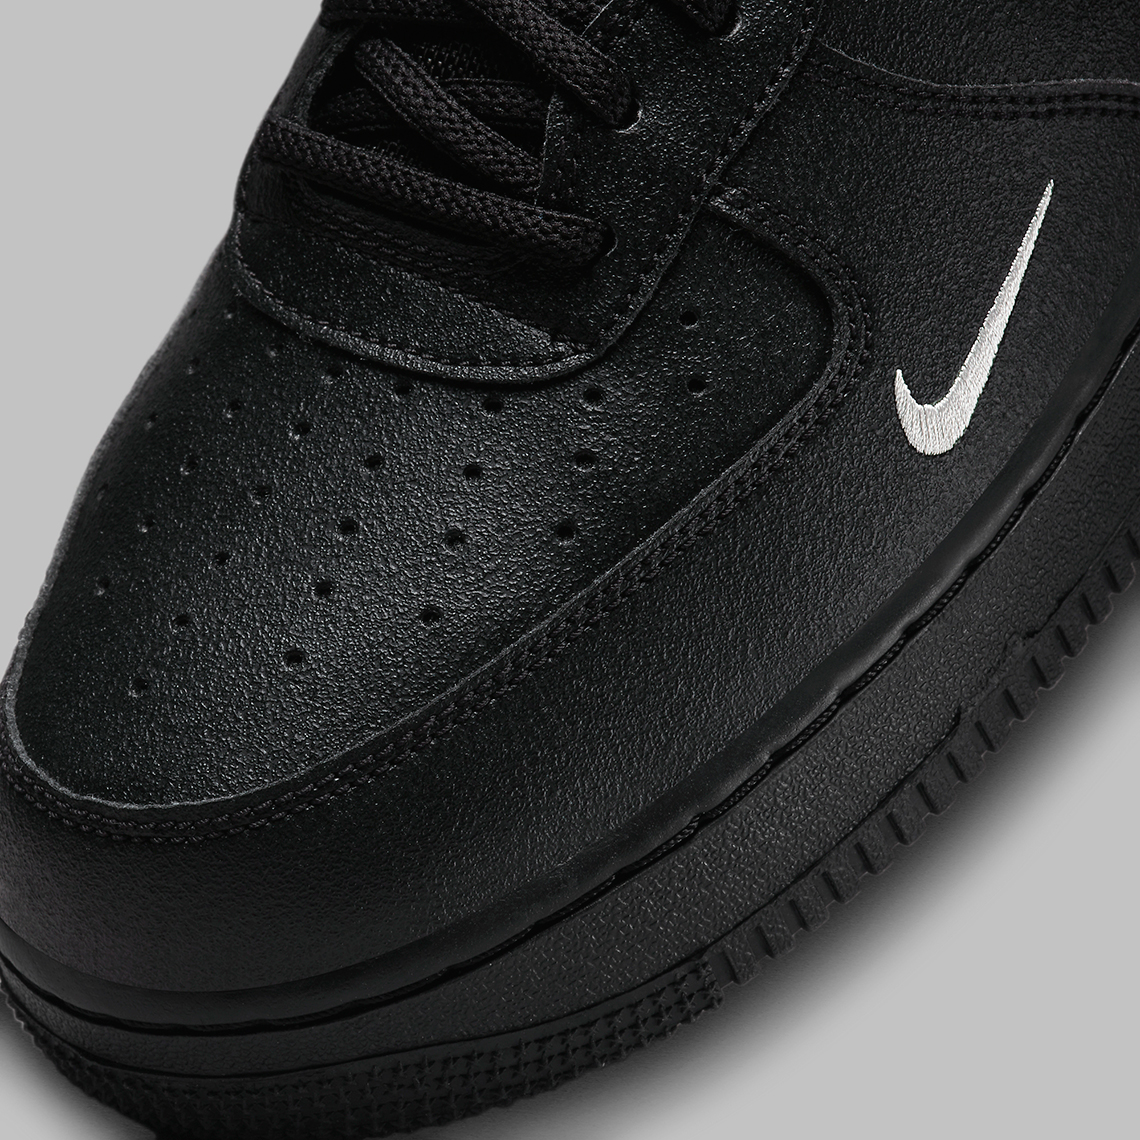 nike air force 1 low black white dx8967 001 6